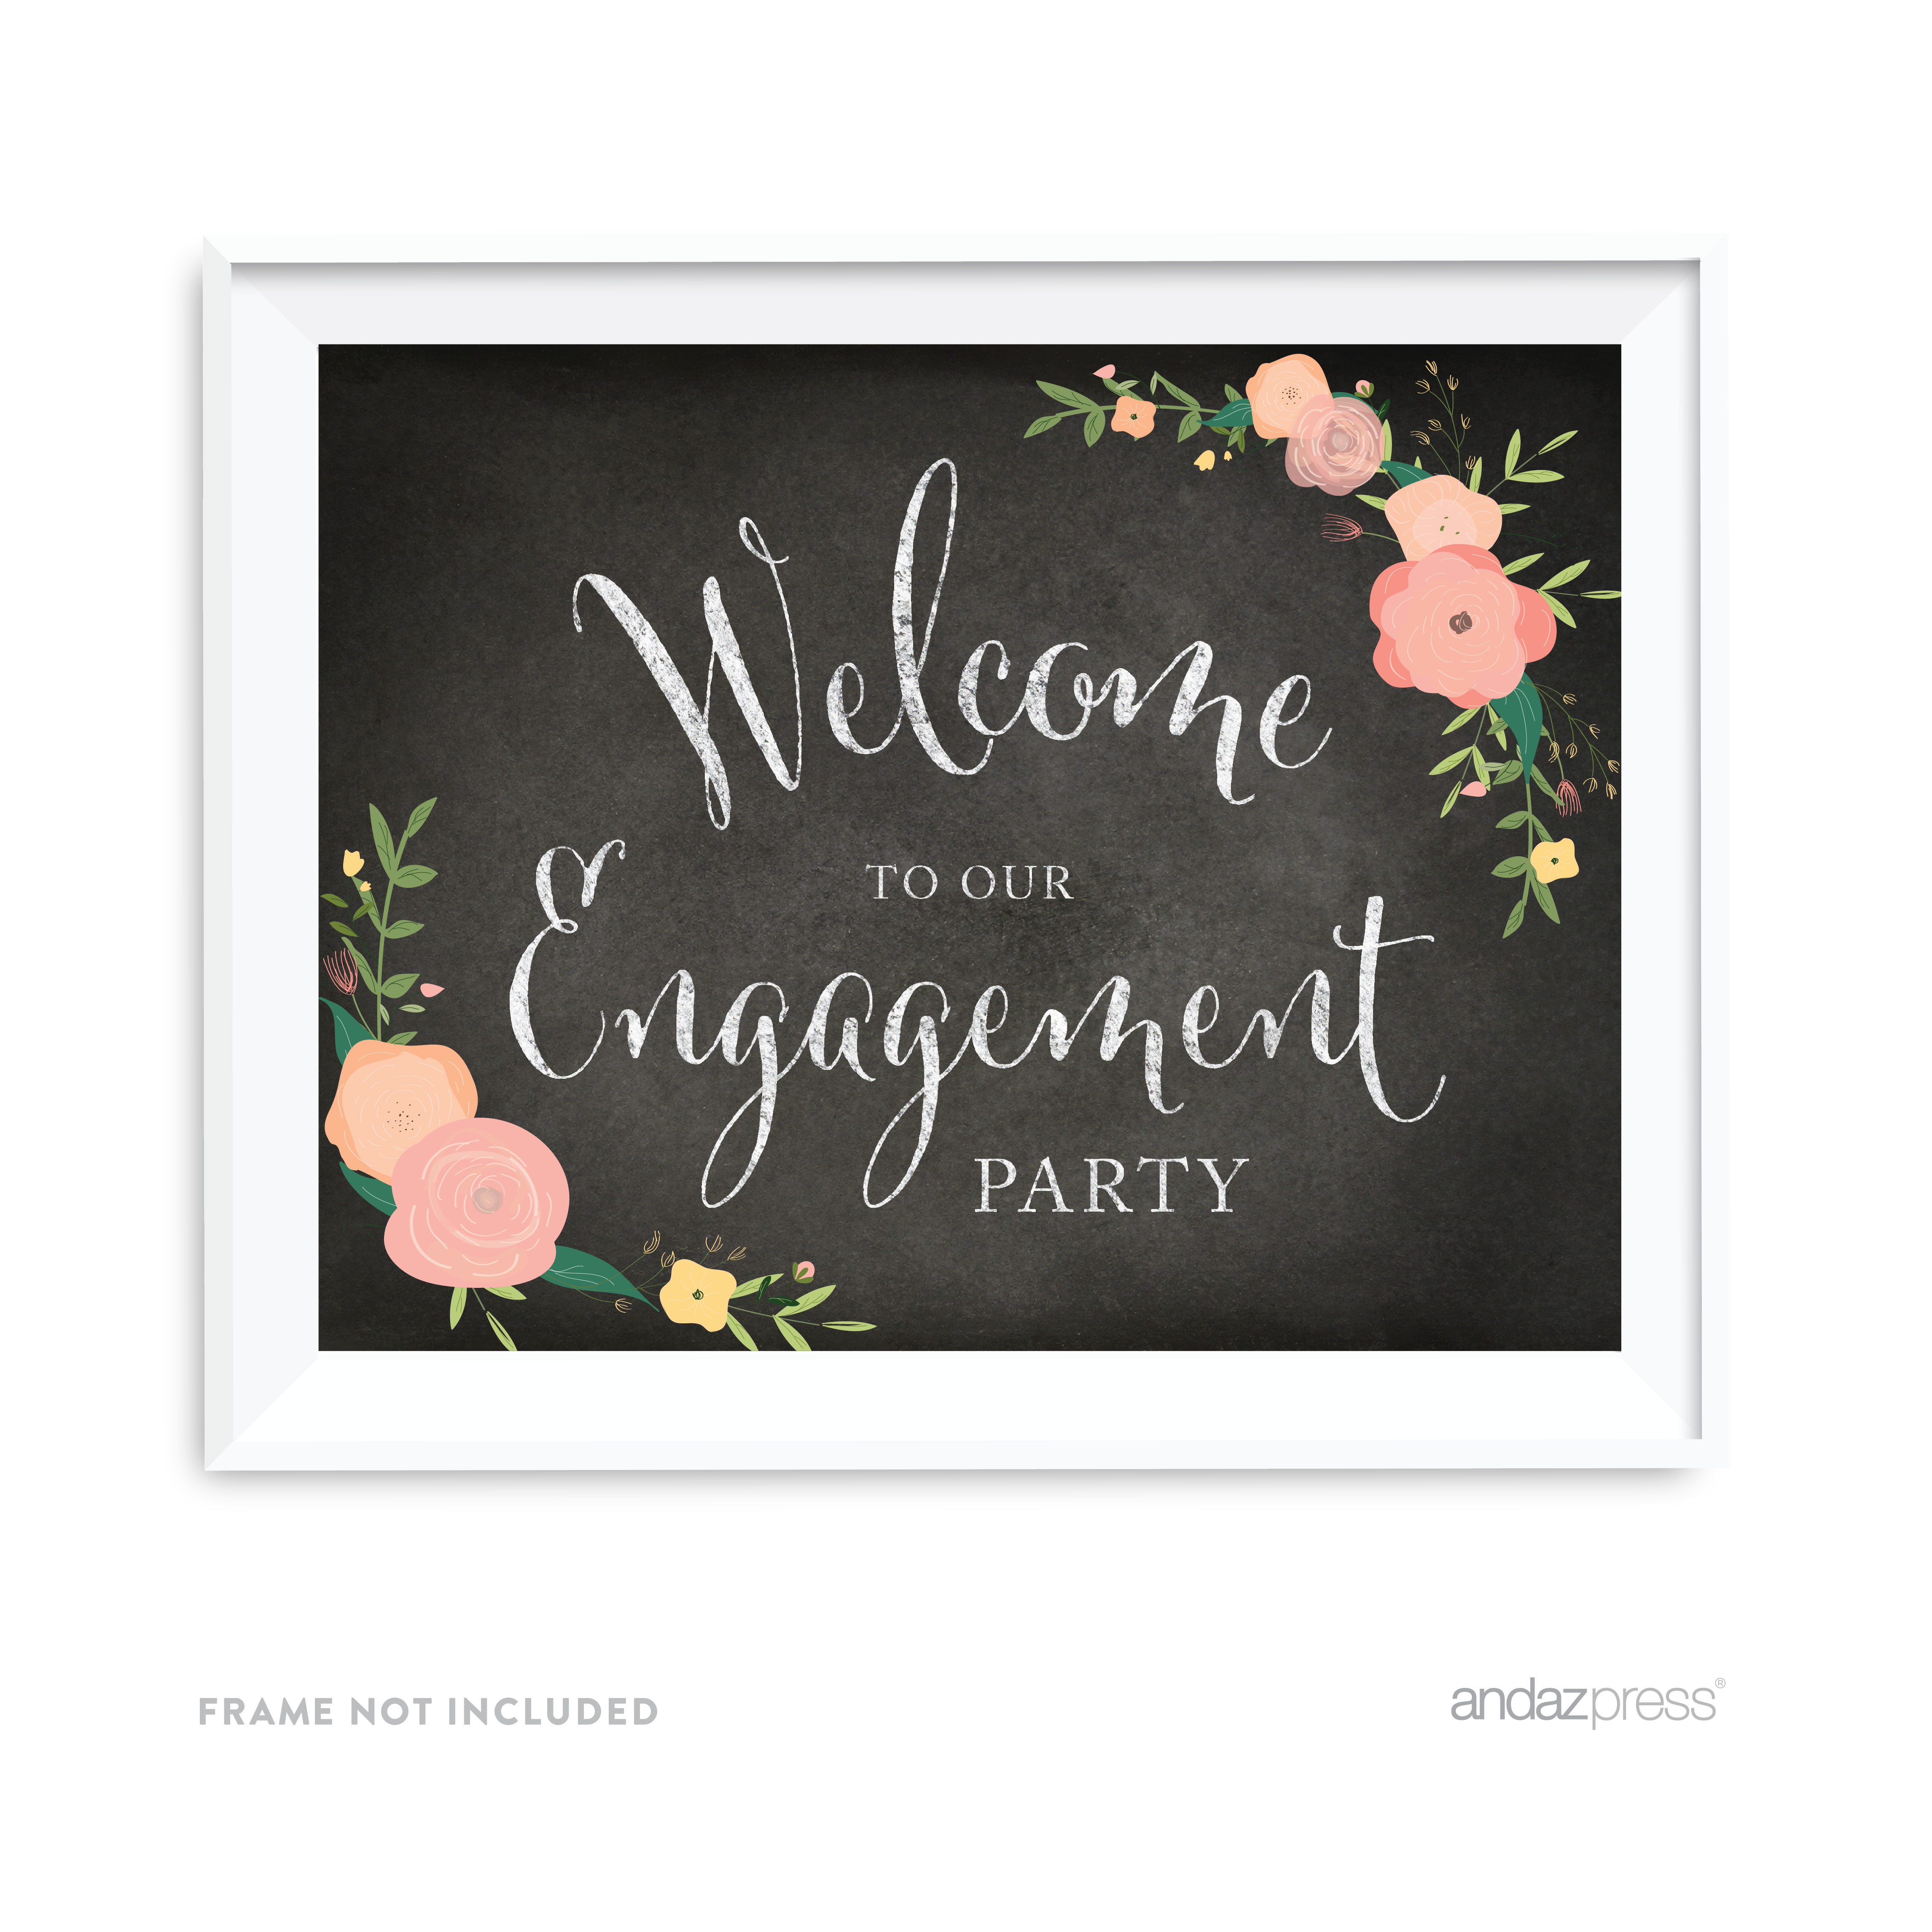 Dark Grey Burlap & Lace Welcome To Our Engagement Party Wedding Sign 